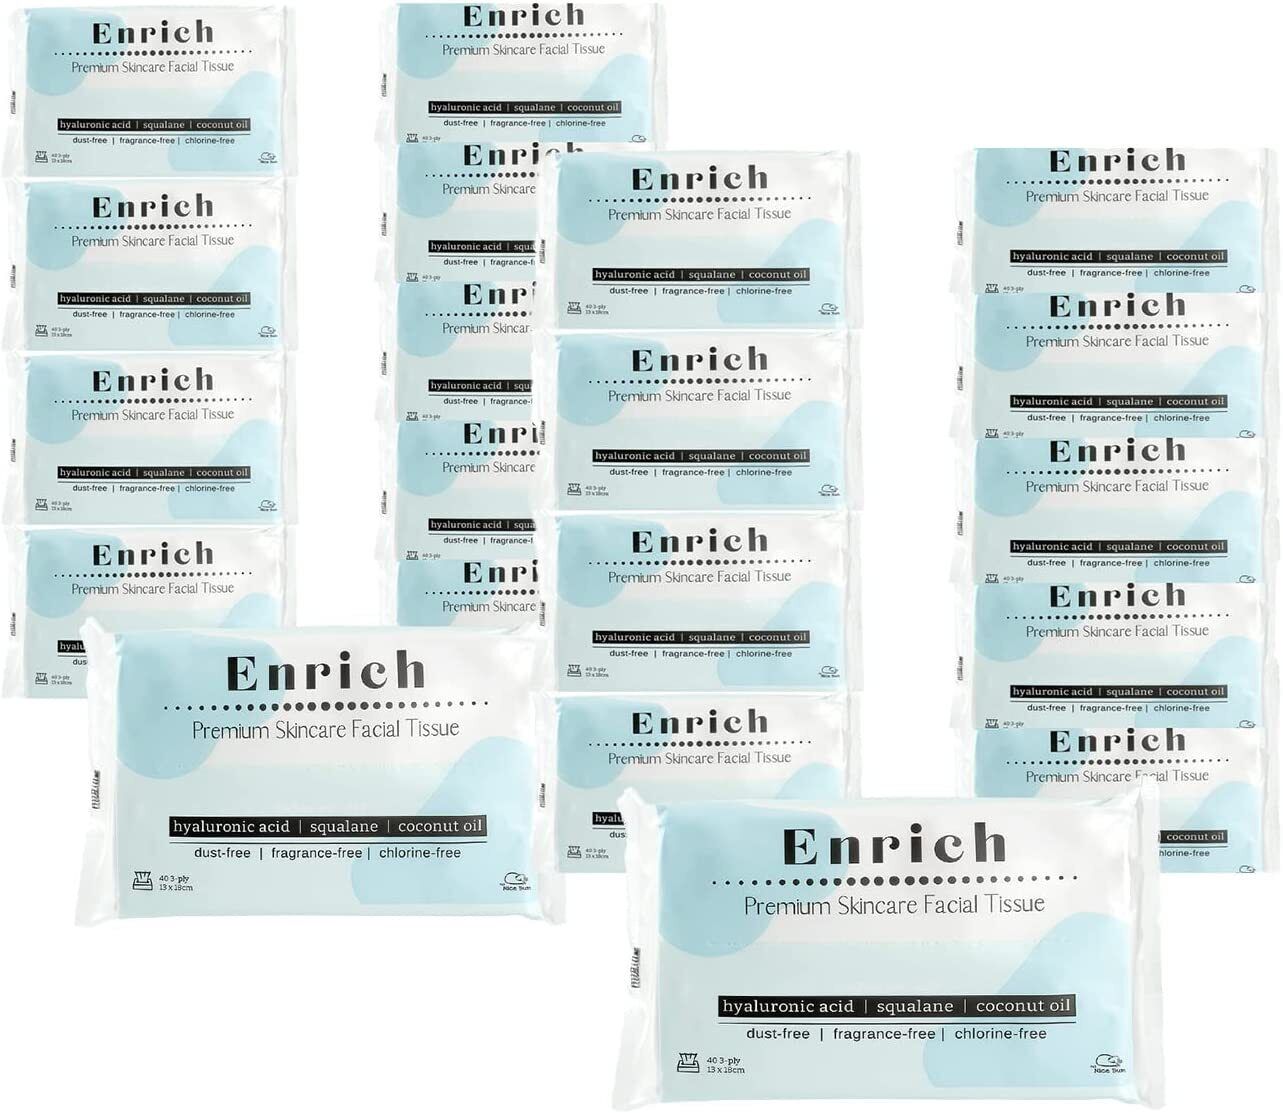 Enrich Lotion Facial Tissue Travel and Pocket Size 40 Sheets Per Pack 3-Ply